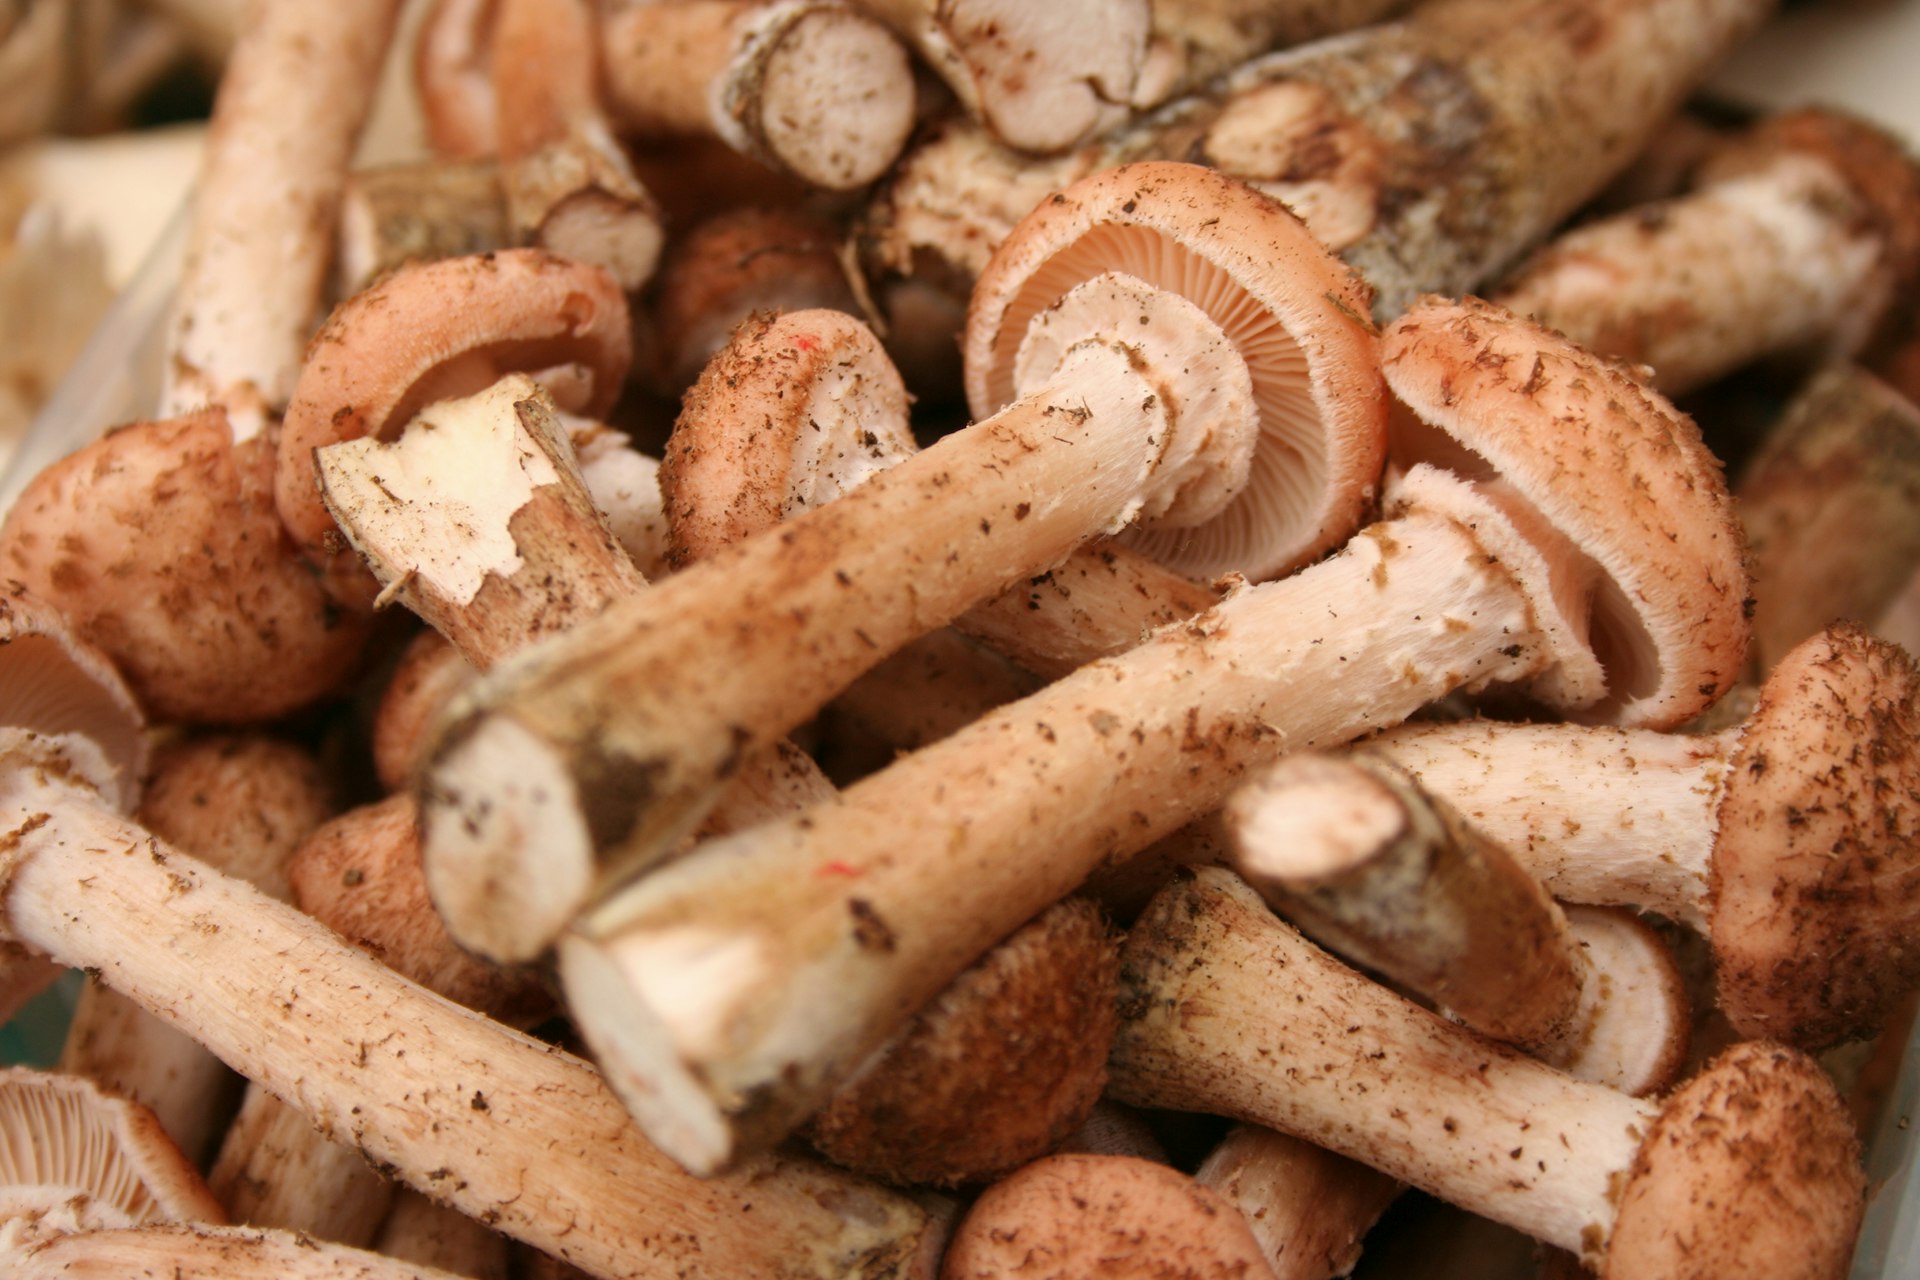 Mushrooms on show at a stall 